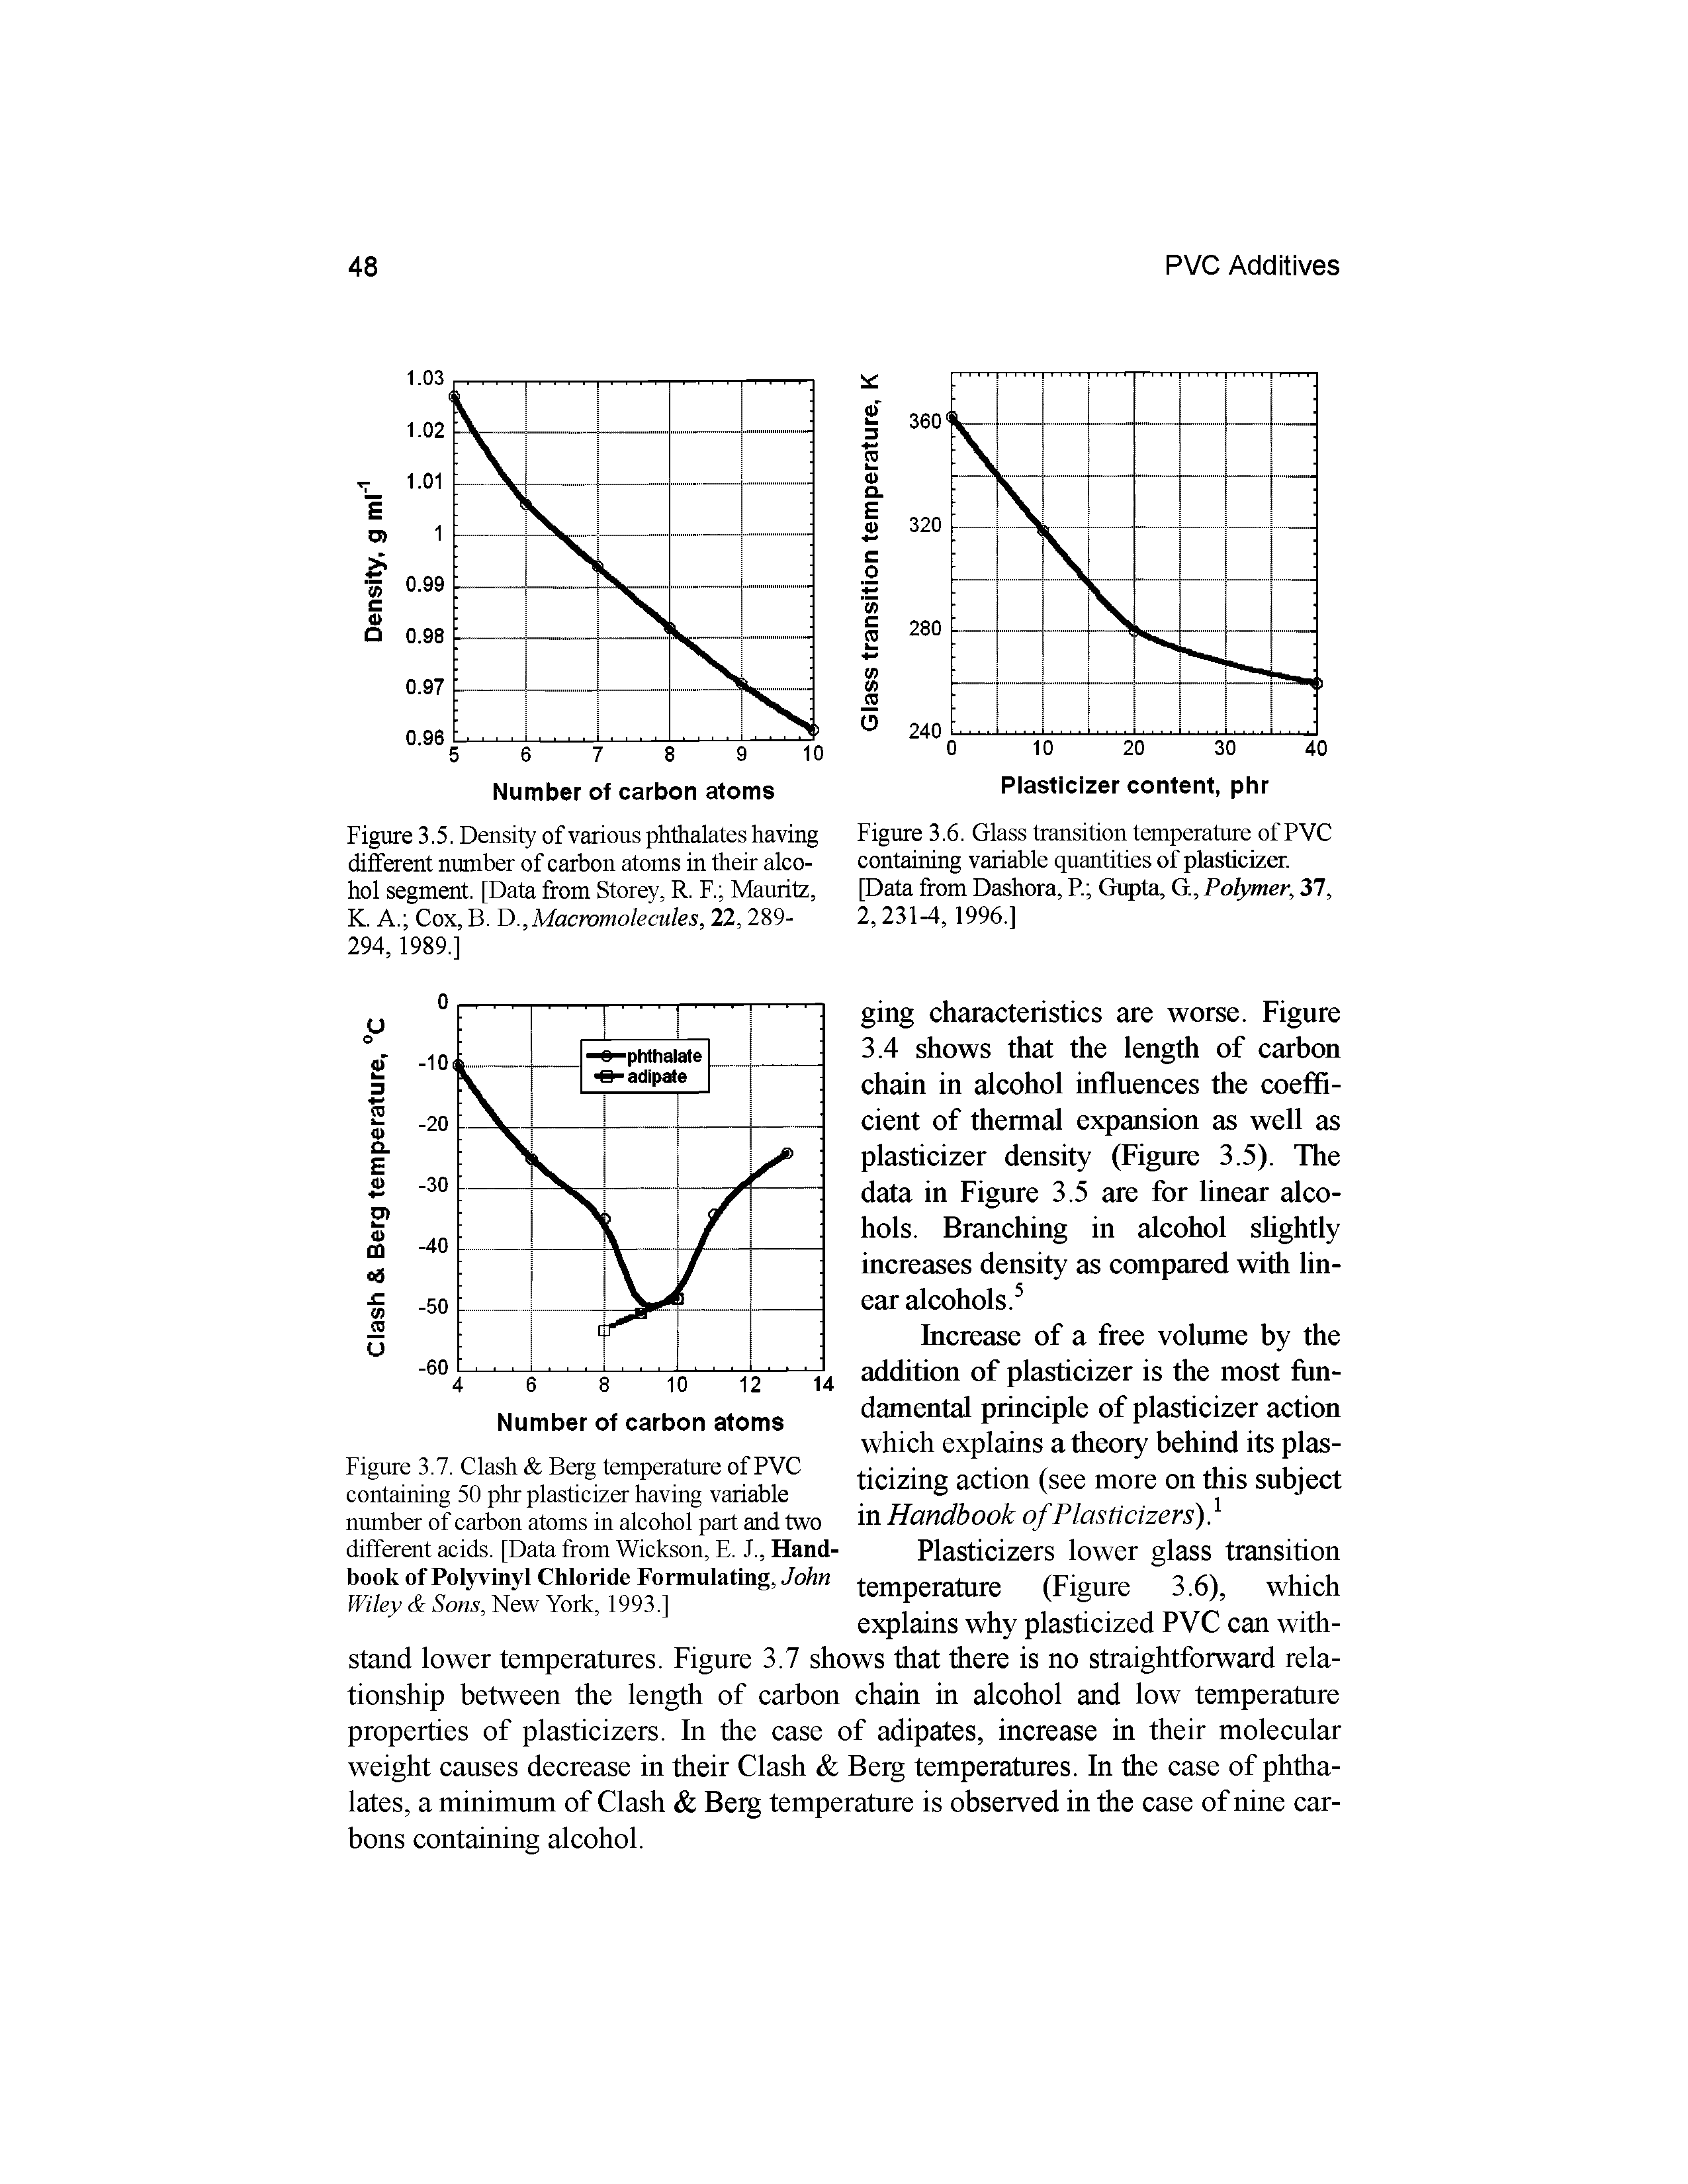 Figure 3.7. Clash Berg temperature of PVC containing 50 phr plasticizer having variable number of carbon atoms in alcohol part and two different acids. [Data from Wickson, E. J., Handbook of Polyvinyl Chloride Formulating, John Wiley Sons, New York, 1993.]...